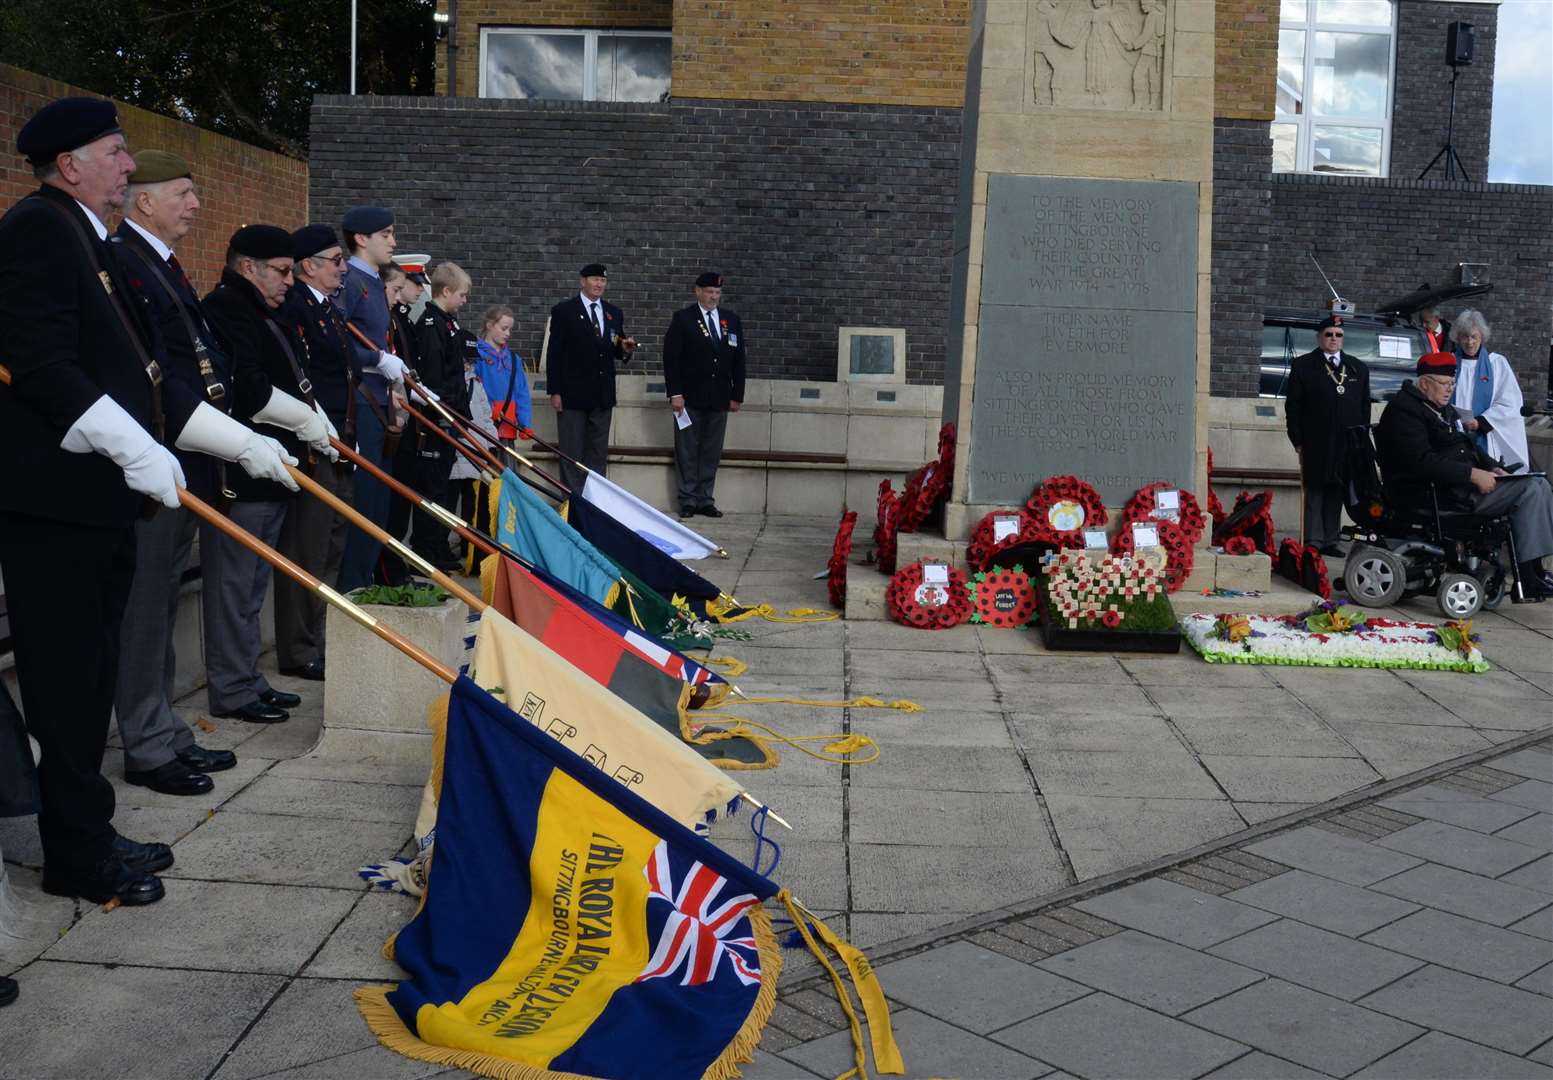 Standard bearers at the Remembrance Day service in Sittingbourne in 2017. Picture: Chris Davey 5206119